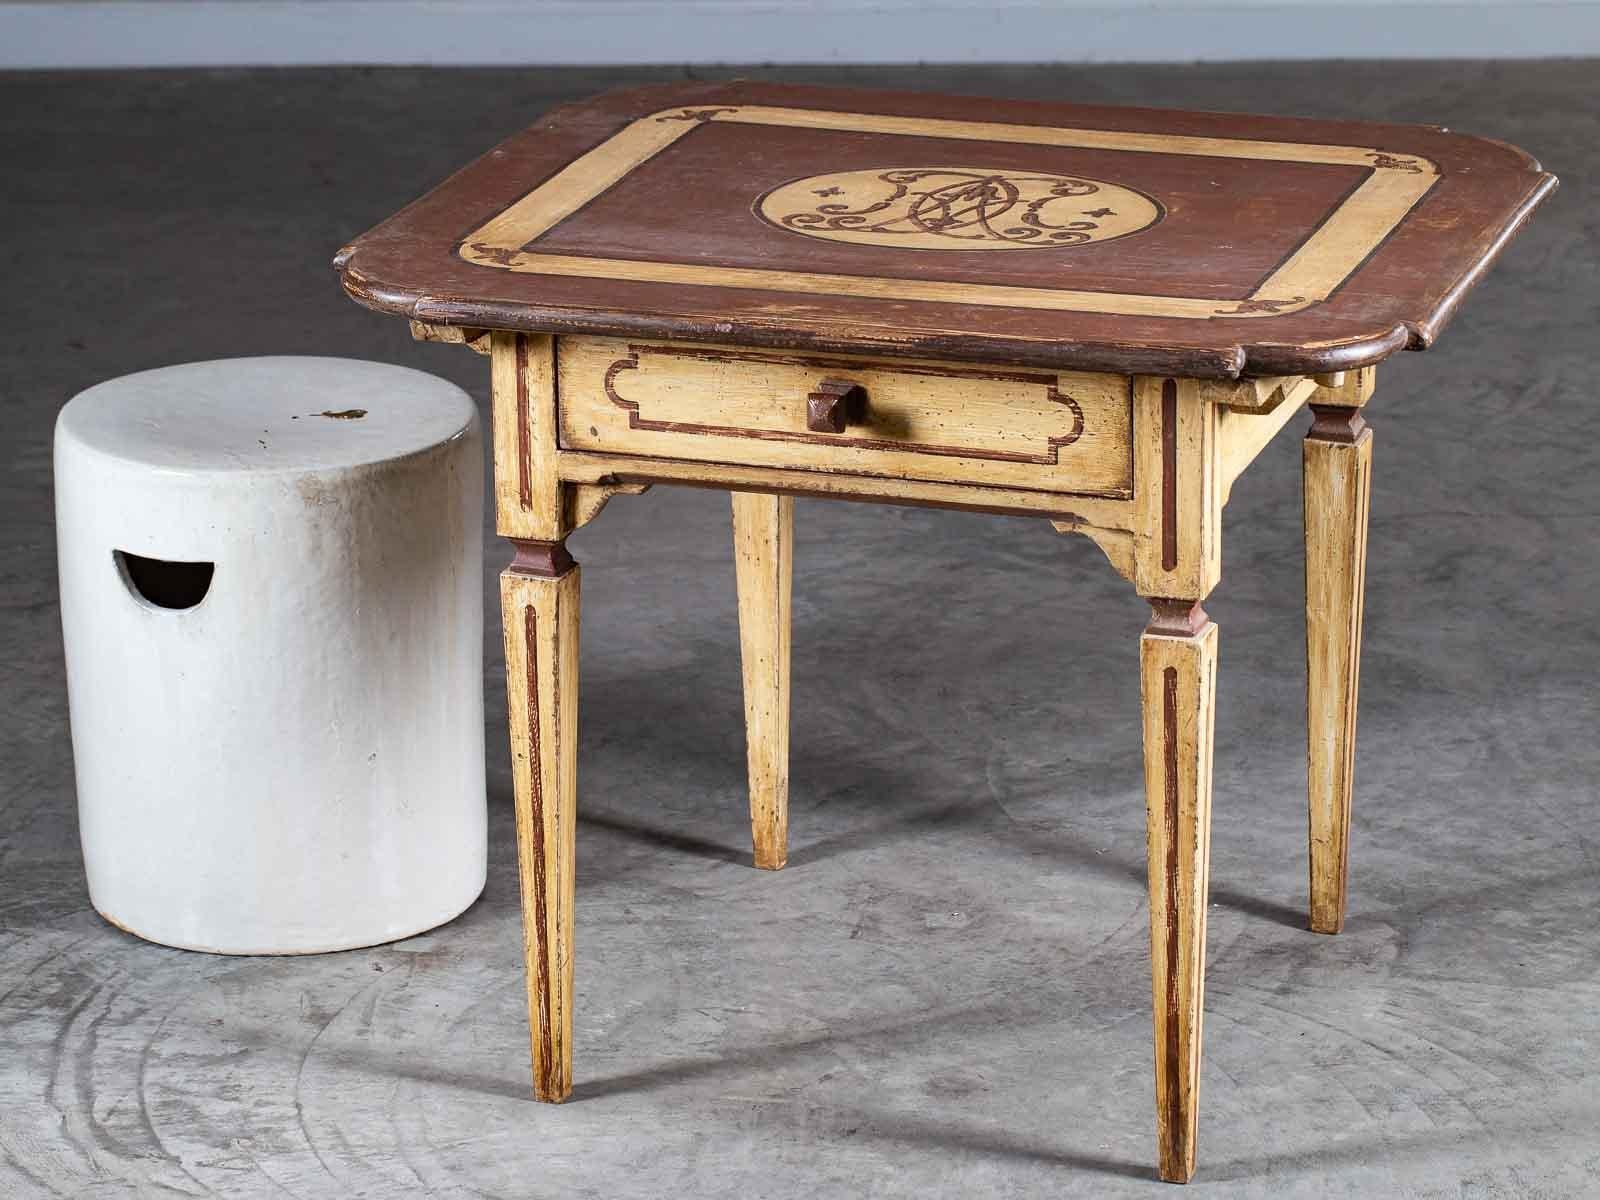 A handsome antique German Louis XVI period painted table circa 1790 having a large drawer. The elegant Neoclassical lines of this table with its straight tapered legs and symmetrically shaped top are enhanced with the refreshed painted finish.